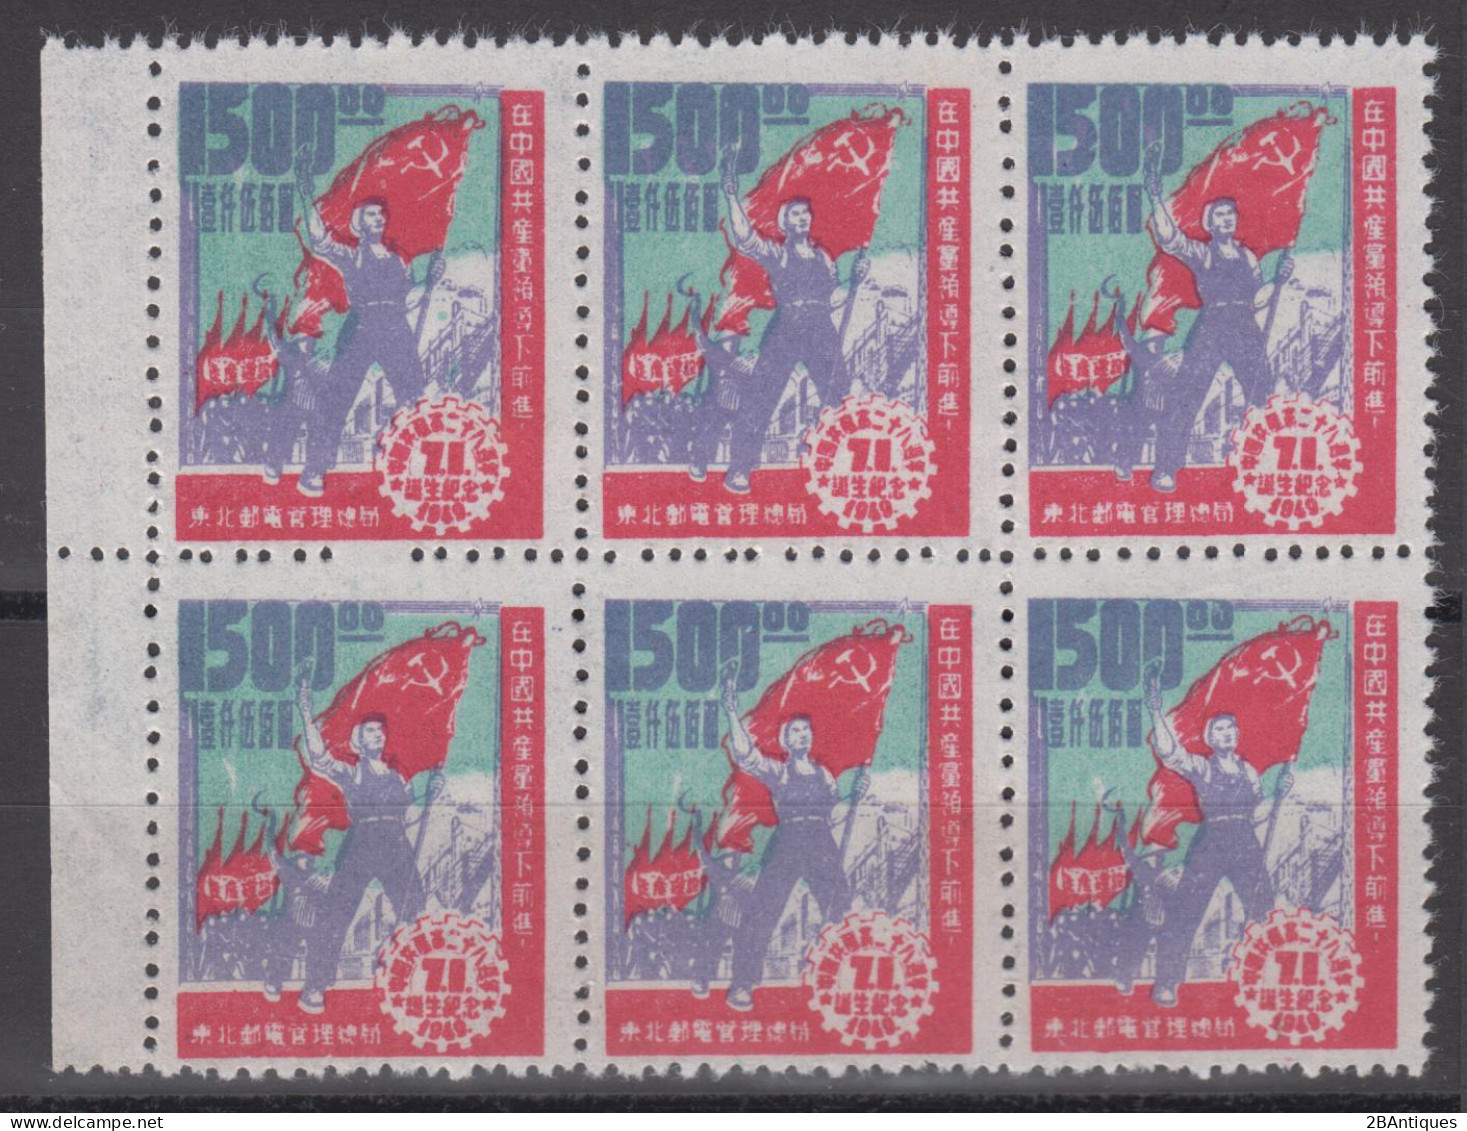 NORTHEAST CHINA 1949 - The 28th Anniversary Of Chinese Communist Party BLOCK OF 6! - North-Eastern 1946-48